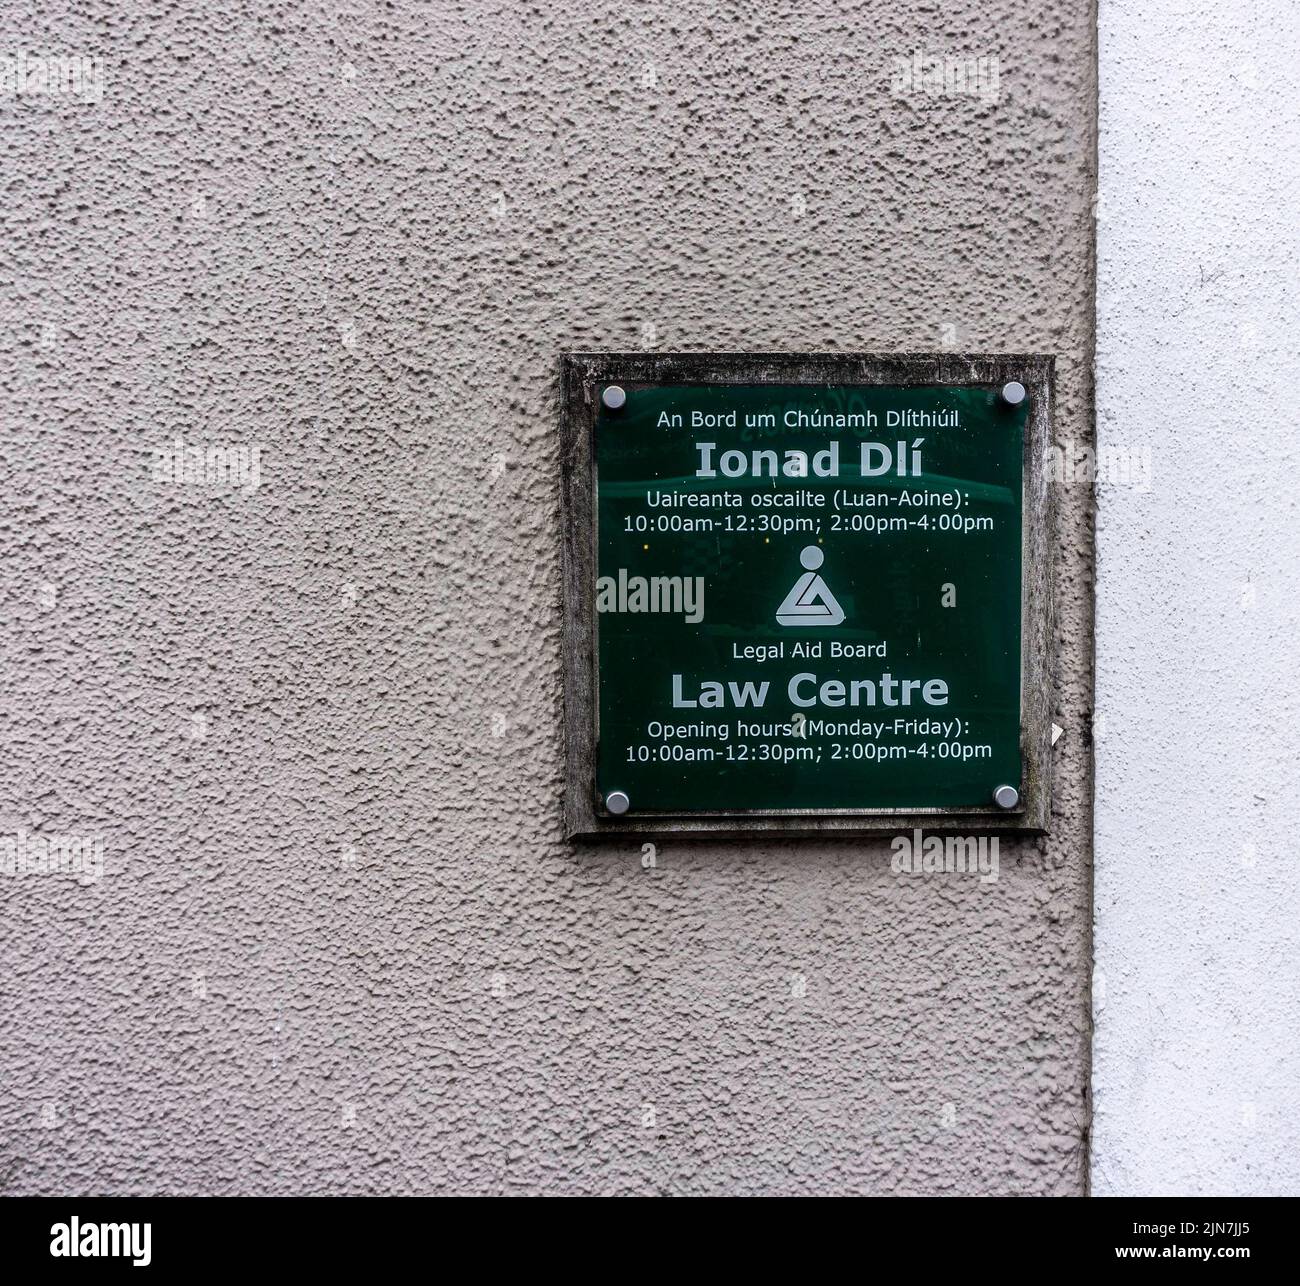 The sign for the Legal Aid Board, Francis Street, Galway, Ireland. Stock Photo